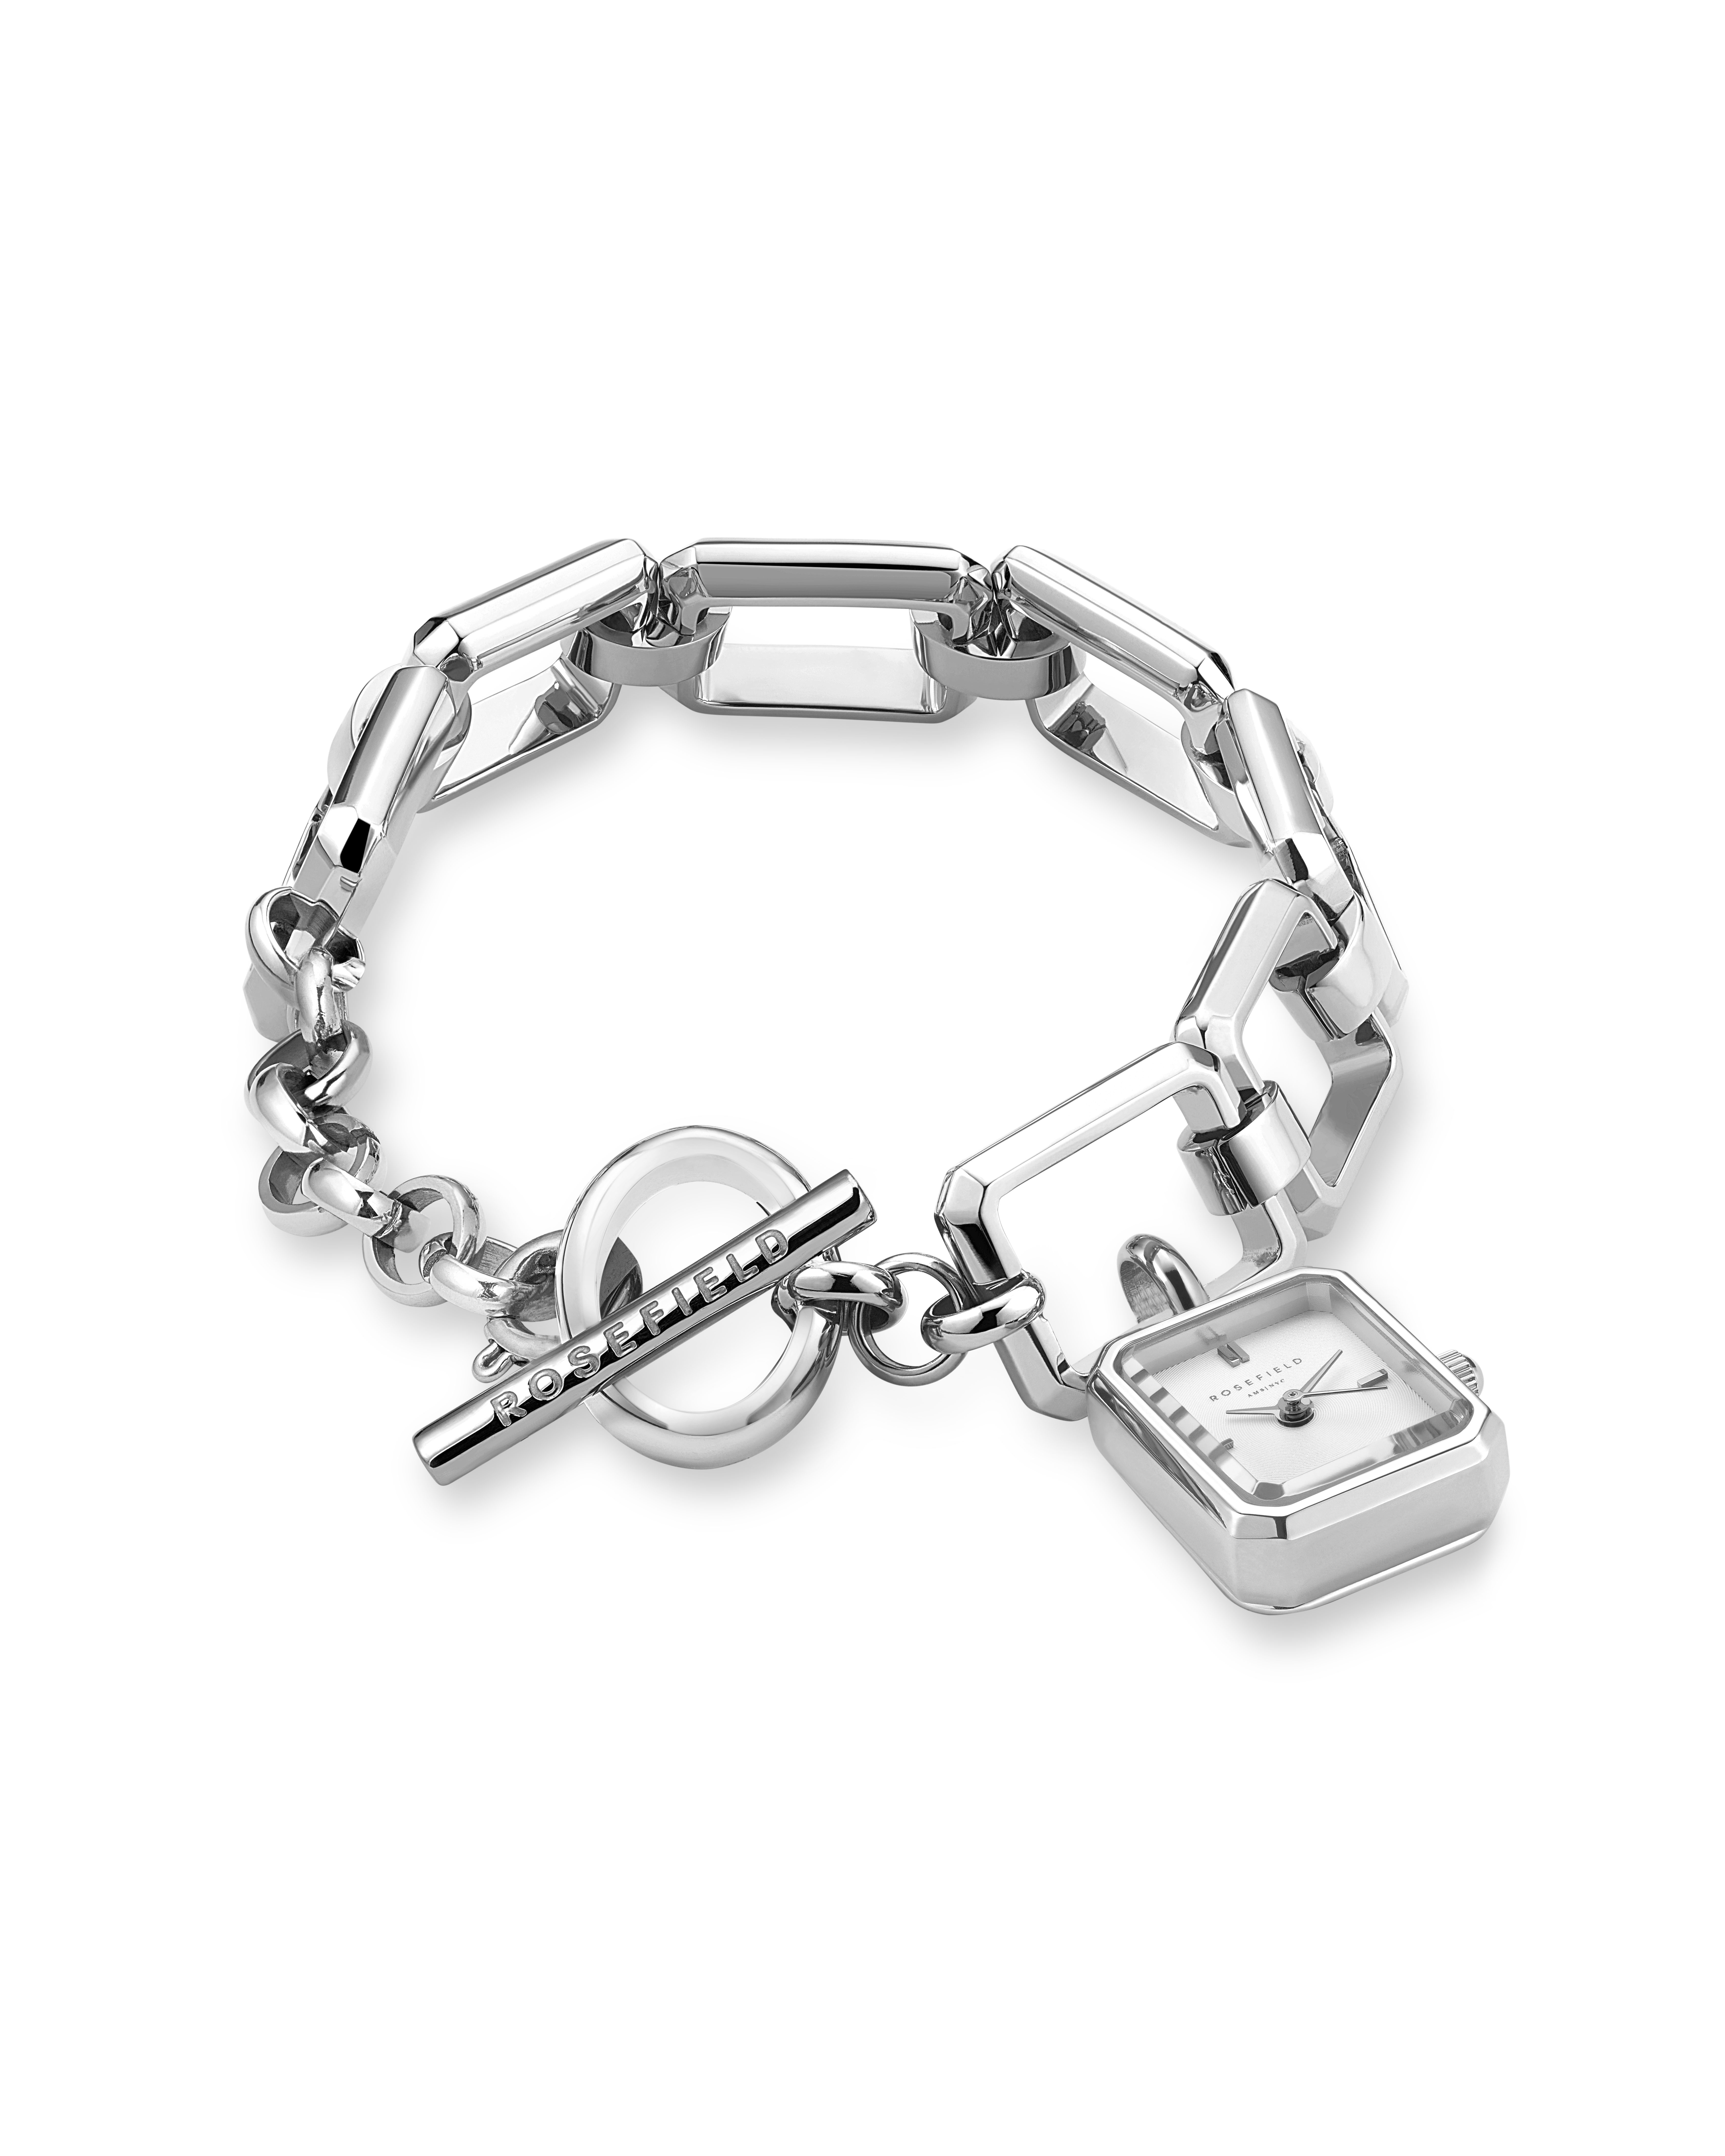 The Octagon Charm Chain Silver SWSSS-O53